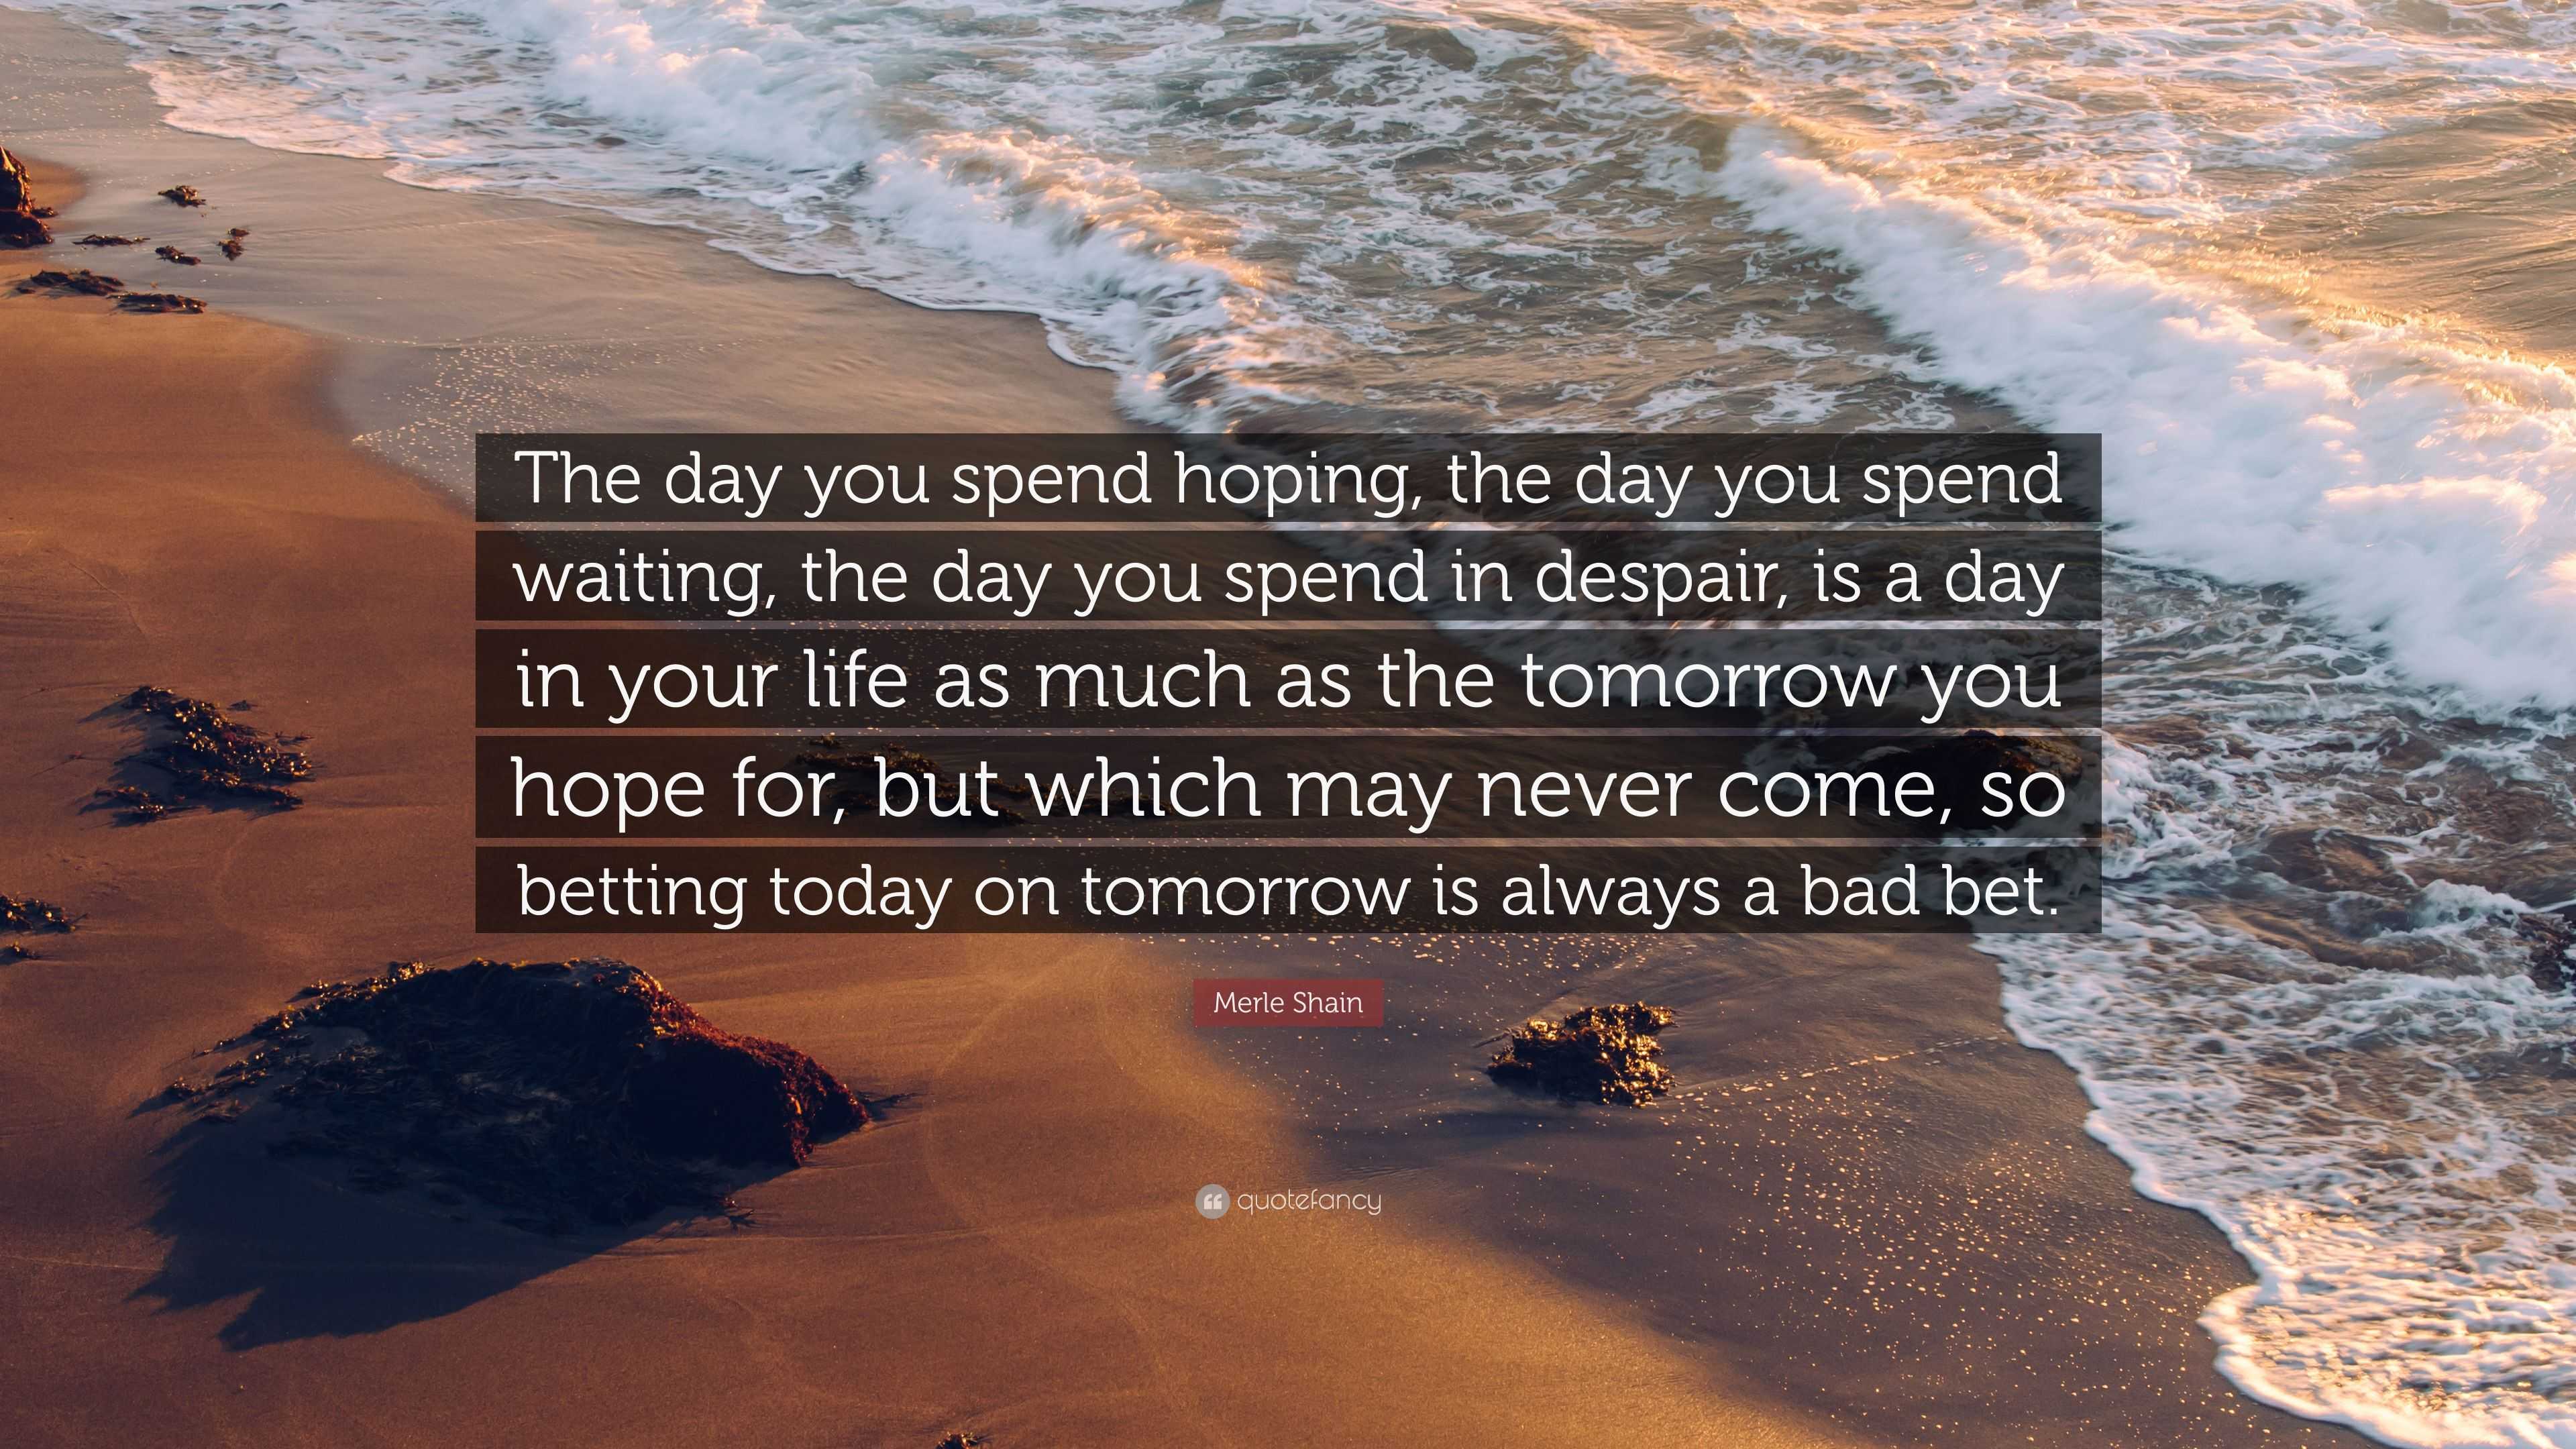 Merle Shain Quote: “The day you spend hoping, the day you spend waiting ...